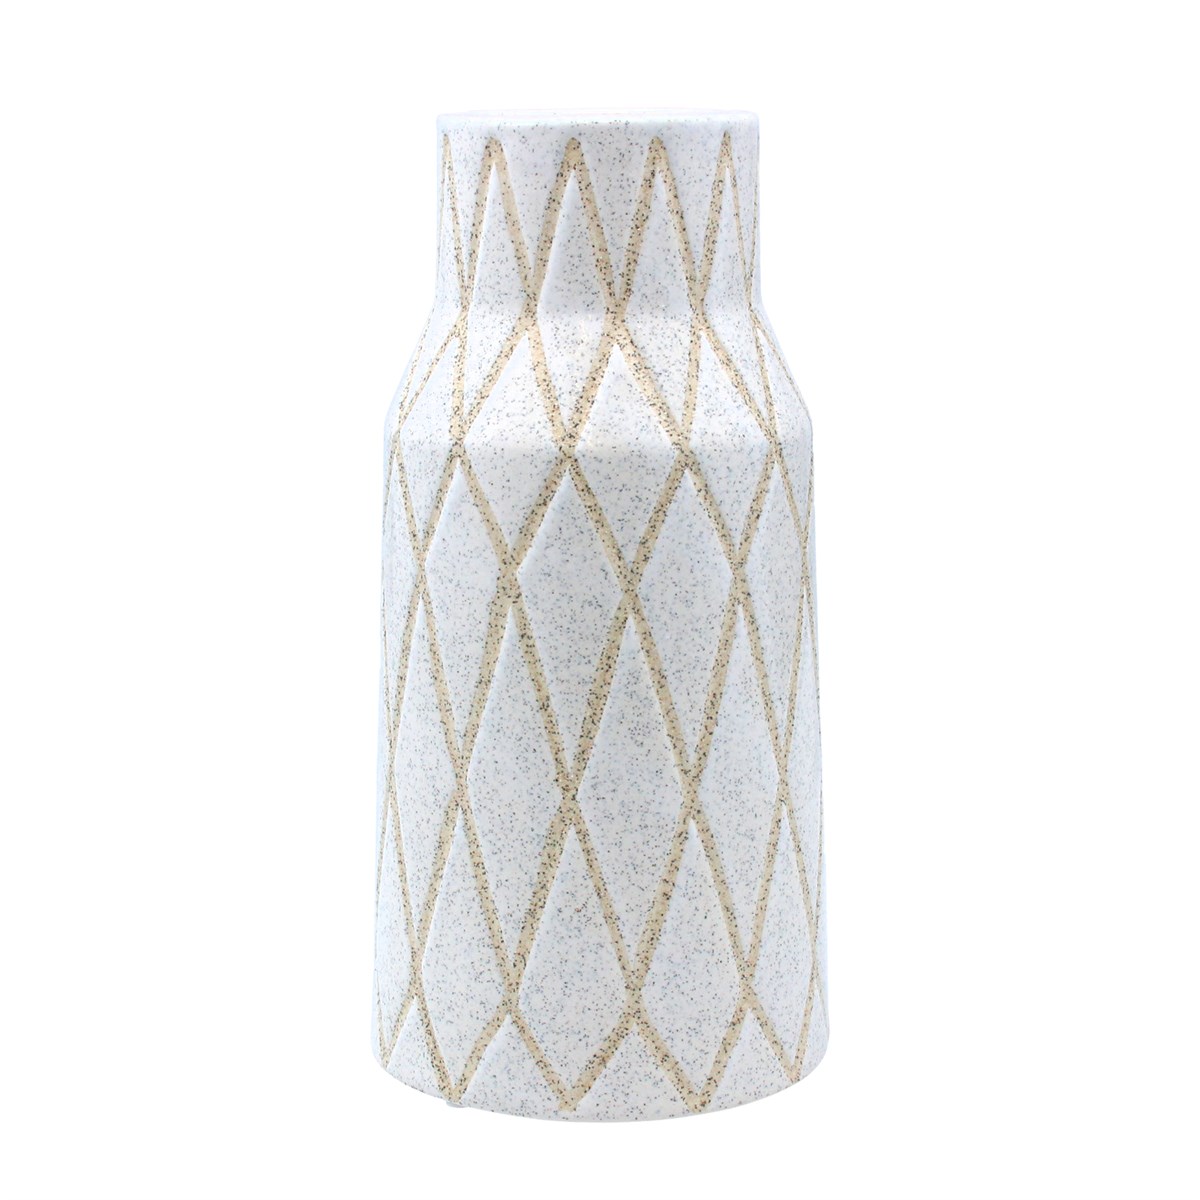 A large speckled ceramic vase with all over geo design. The perfect addition to your home or the perfect gift for yourself or a loved one. By London designer Gisela Graham.